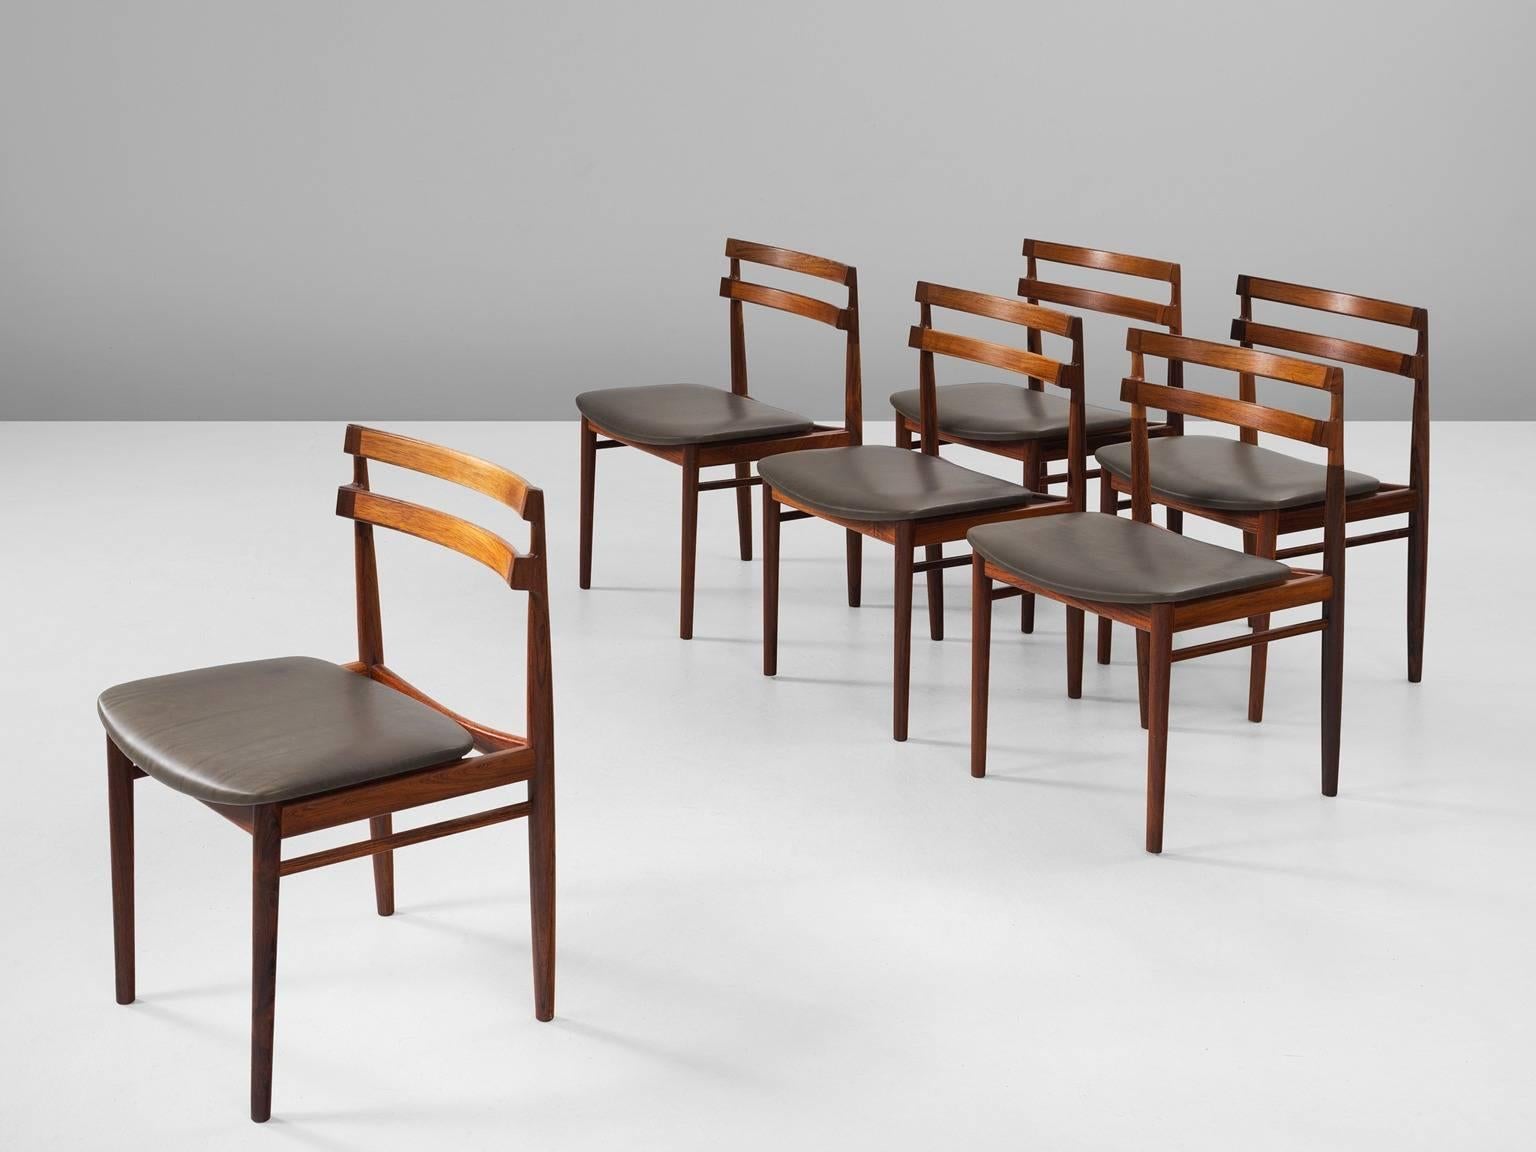 Set of six chairs, in rosewood and leather, for Brande Mobelfabrik, Denmark, 1960s.

Set of six excellent dining room chairs in rosewood and grey-green leather. These chairs have a beautiful design, characteristic as Scandinavian Modern. A